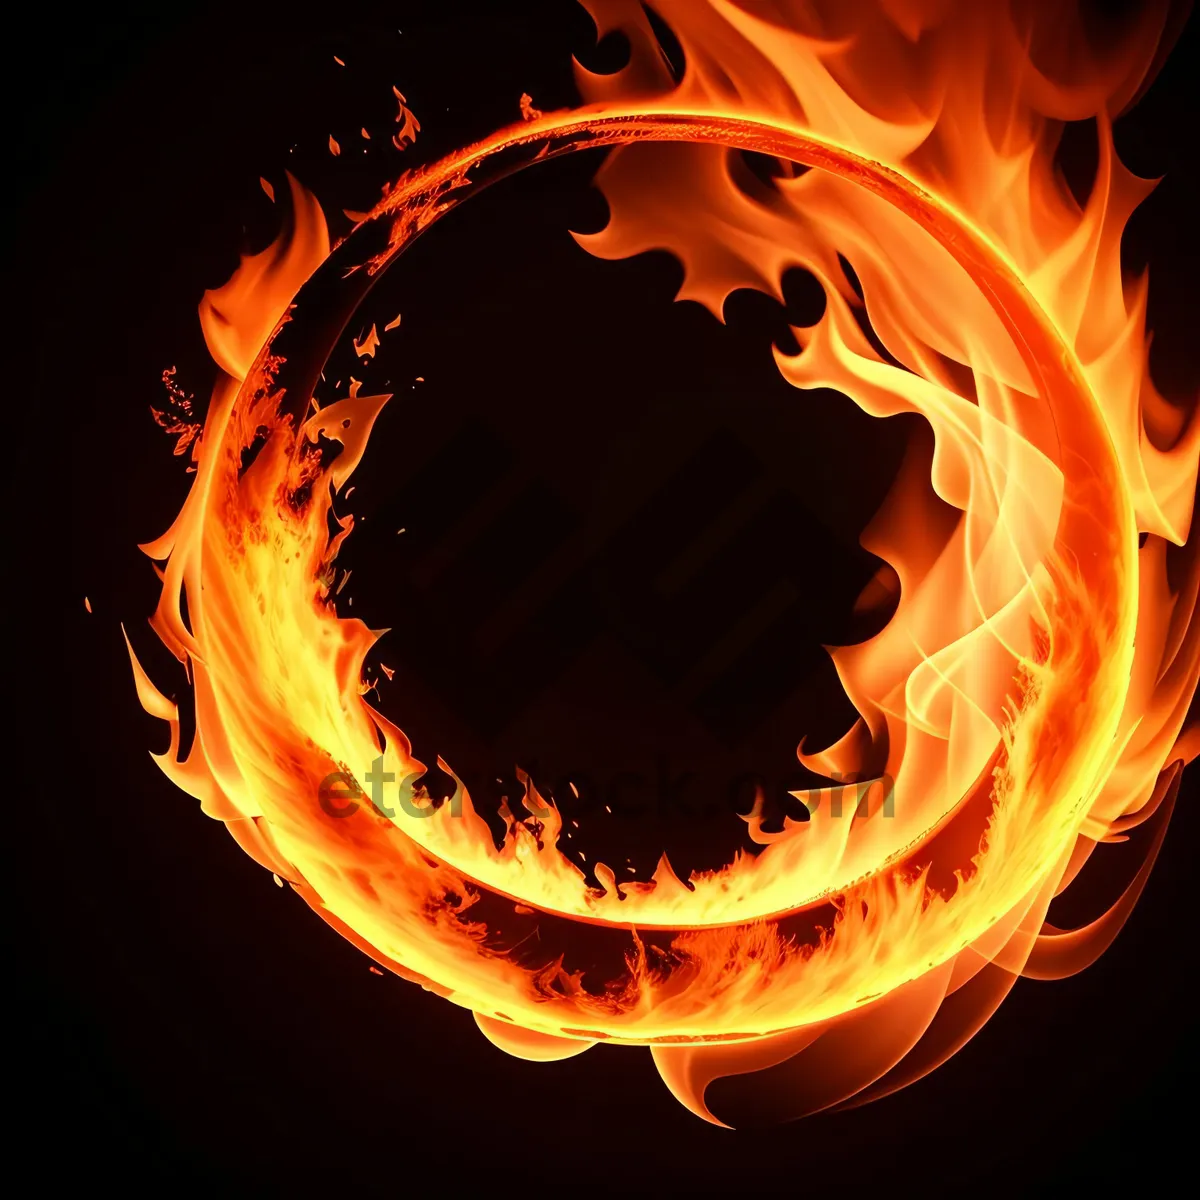 Picture of Blazing Inferno: Fiery Artistic Design with Plasma Flame